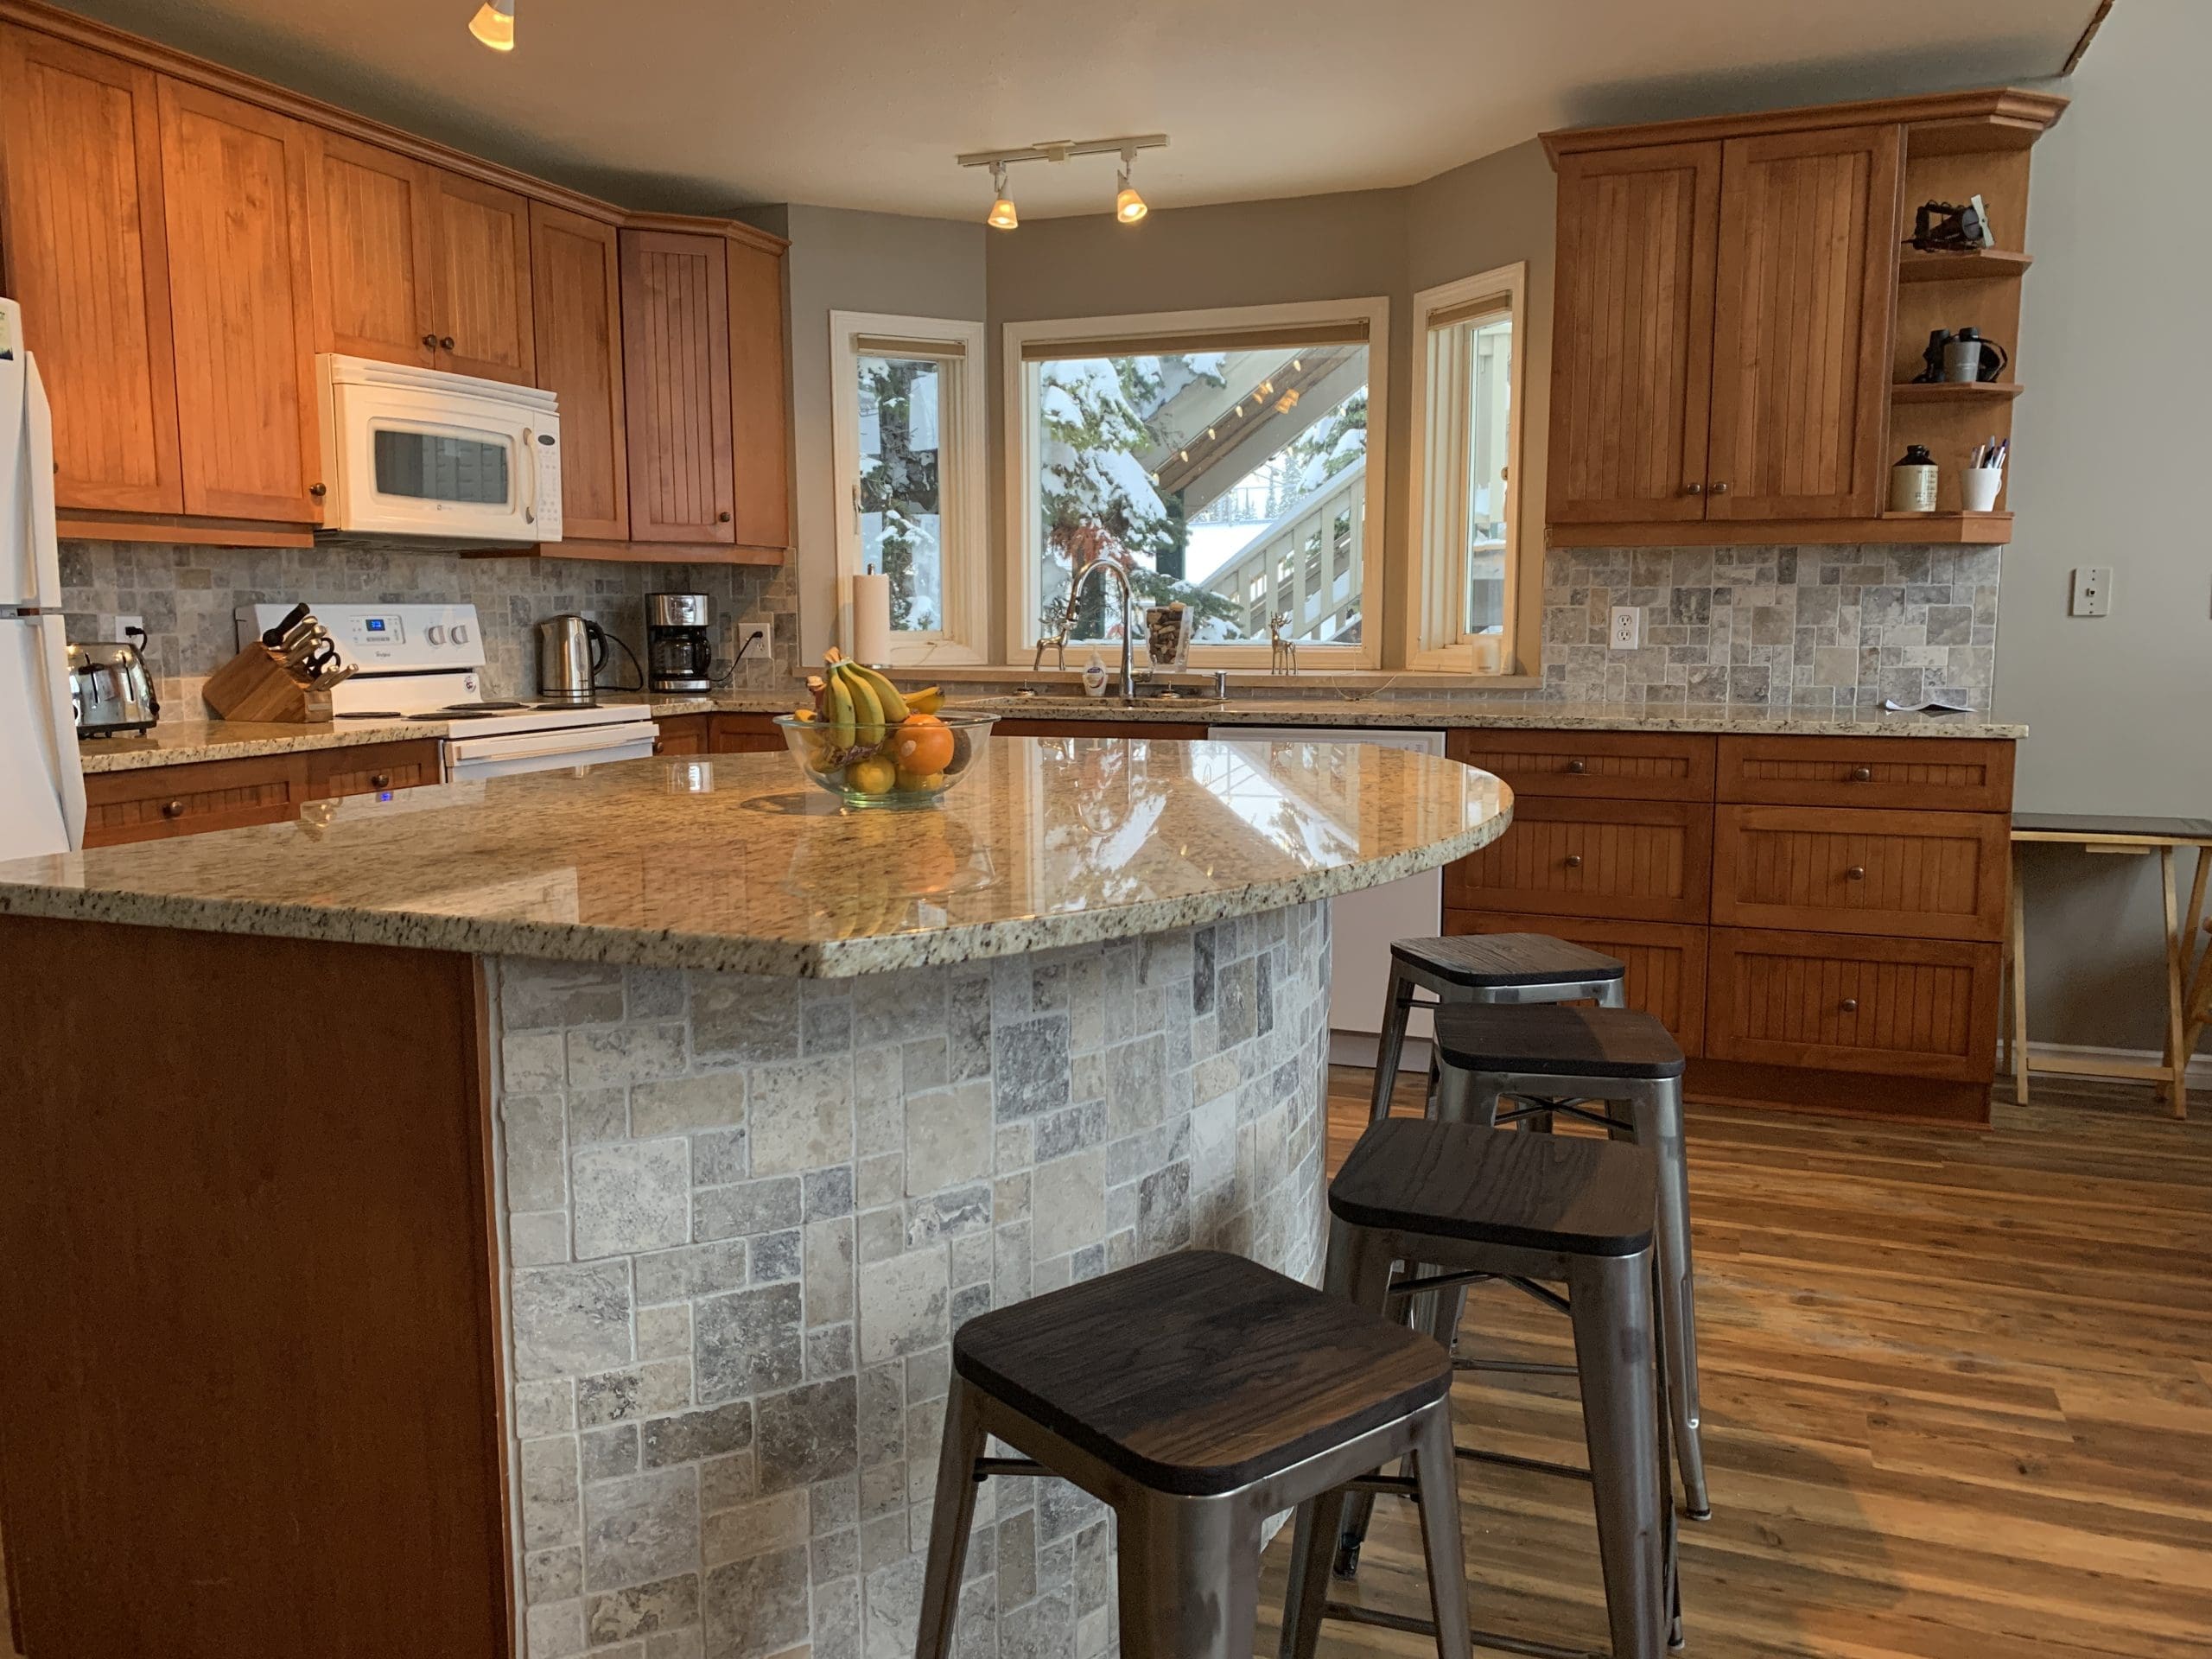 Brand new modern kitchen with breakfast bar, high ceilings and bright windows. Lots of space to spread out. Ski in and out right from the backyard with views of the Alpine Meadows chairlift. Less than a 5 minute walk to the village. Private hot tub, laundry, and modern finishings.